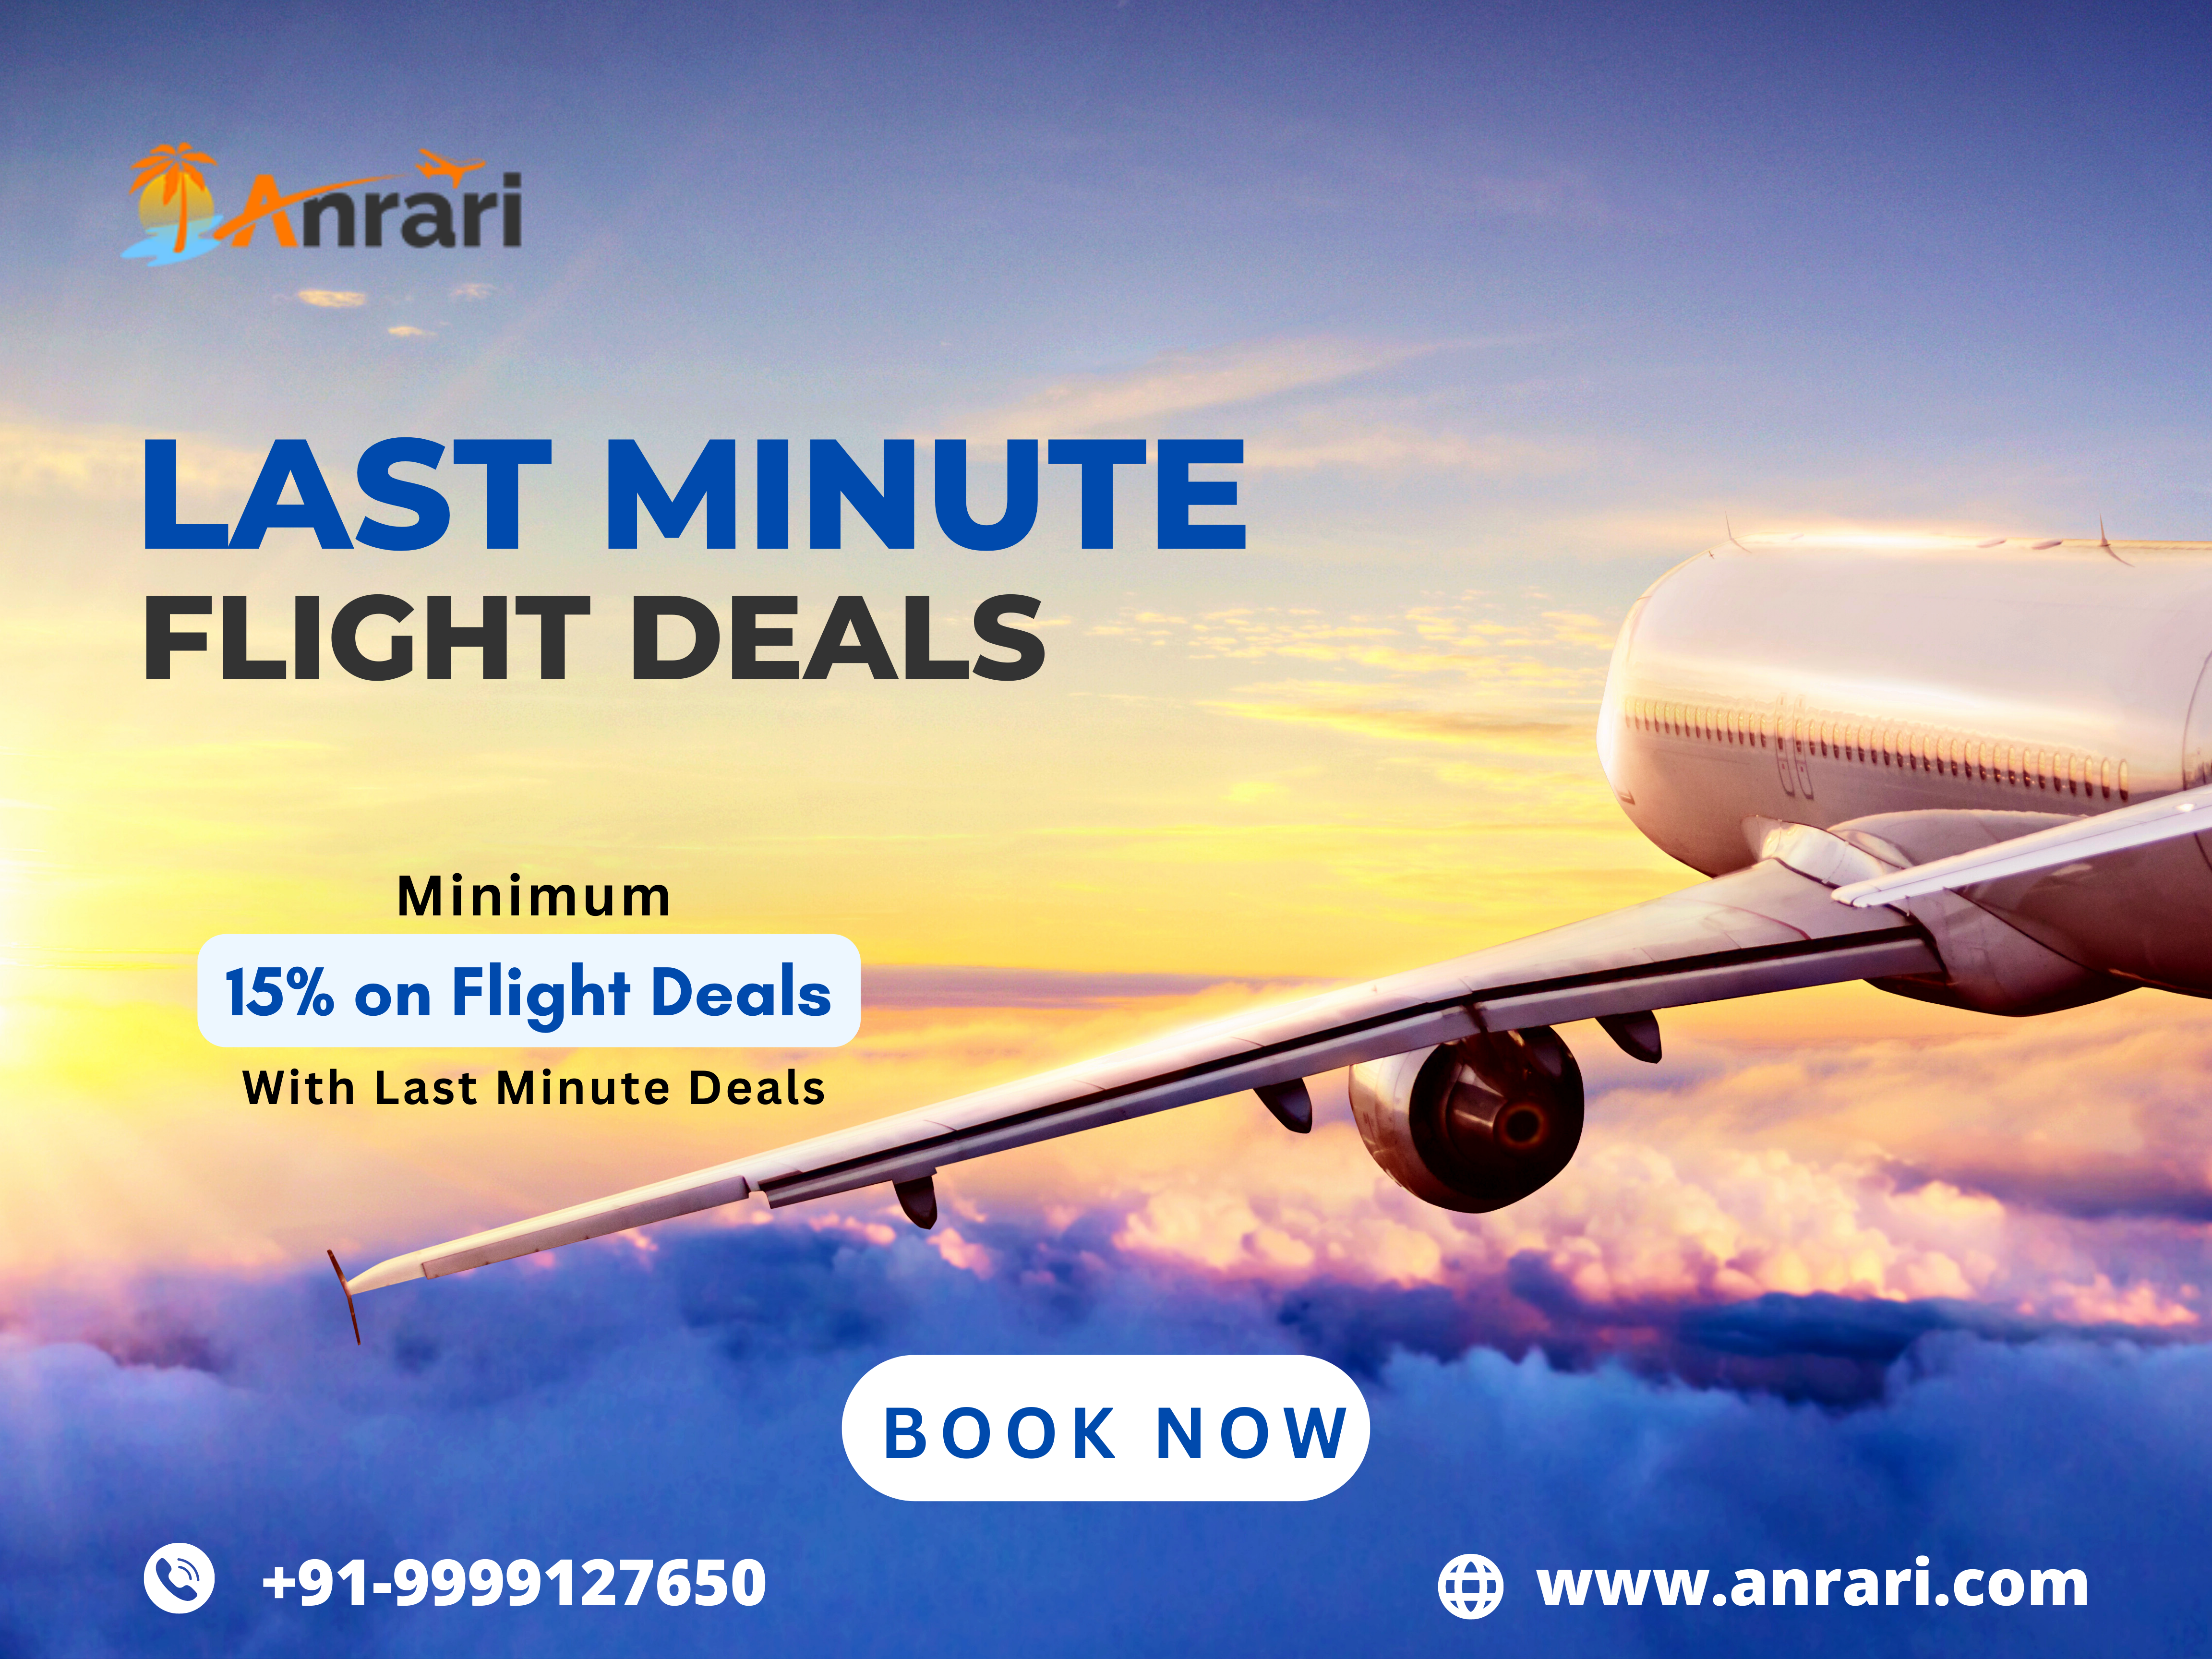 All you need guidance for last-minute and cheap flight deals to Chennai – Anrari-travel services